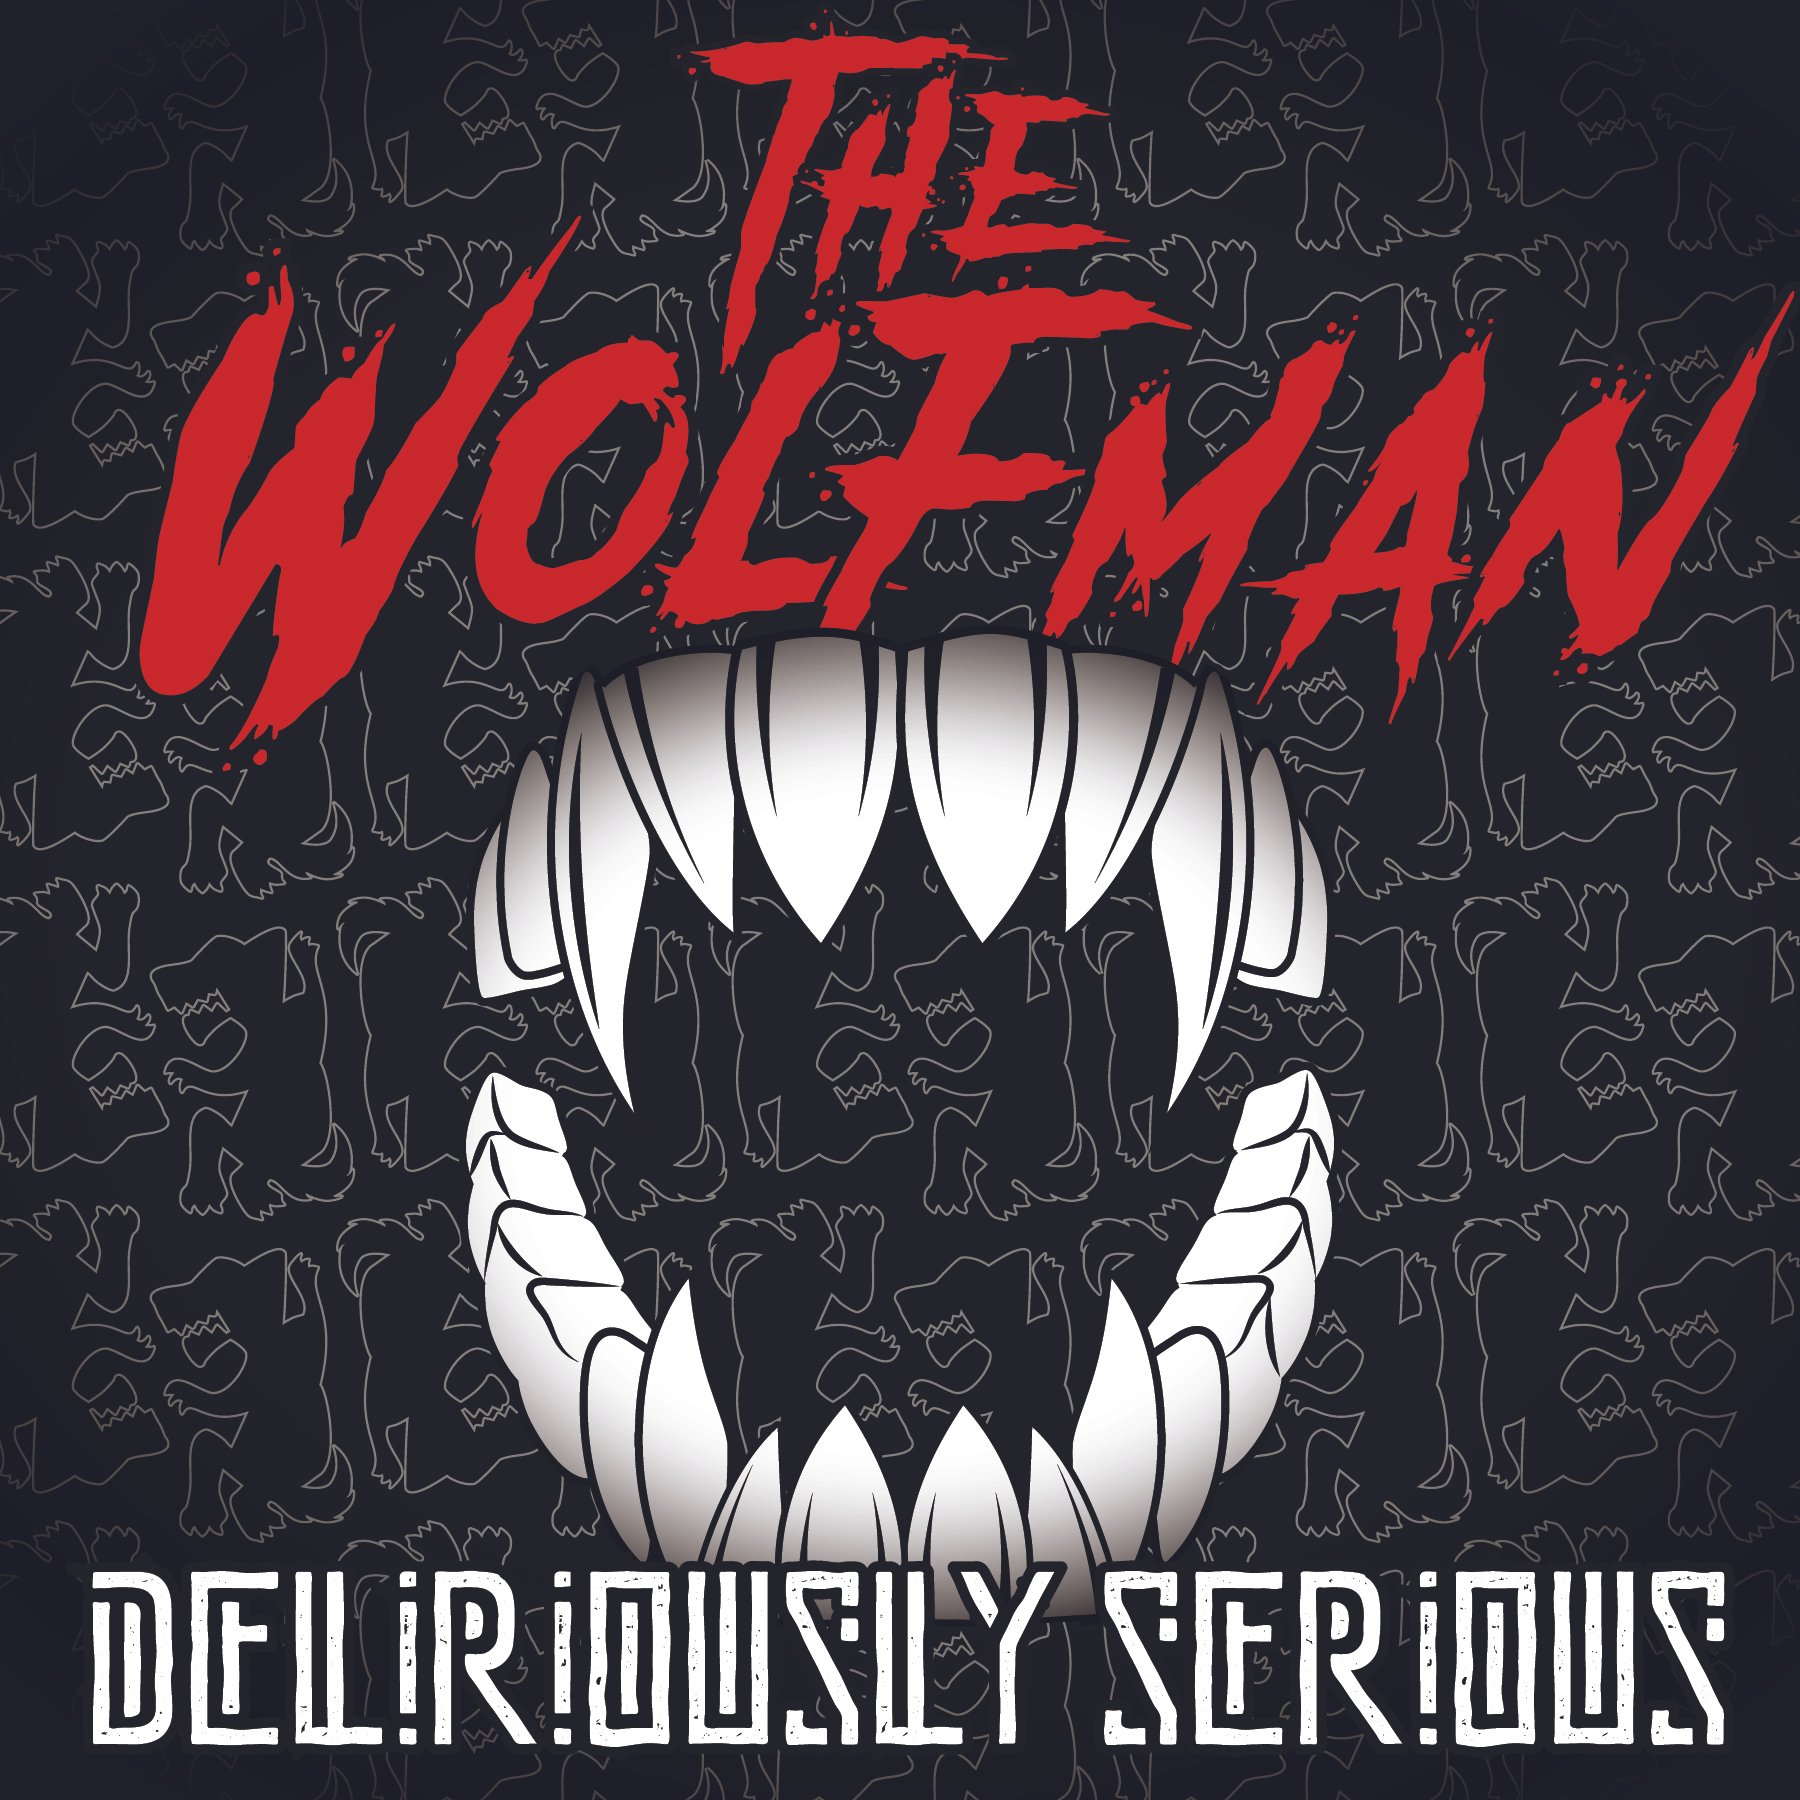 Deliriously Serious - The Wolfman